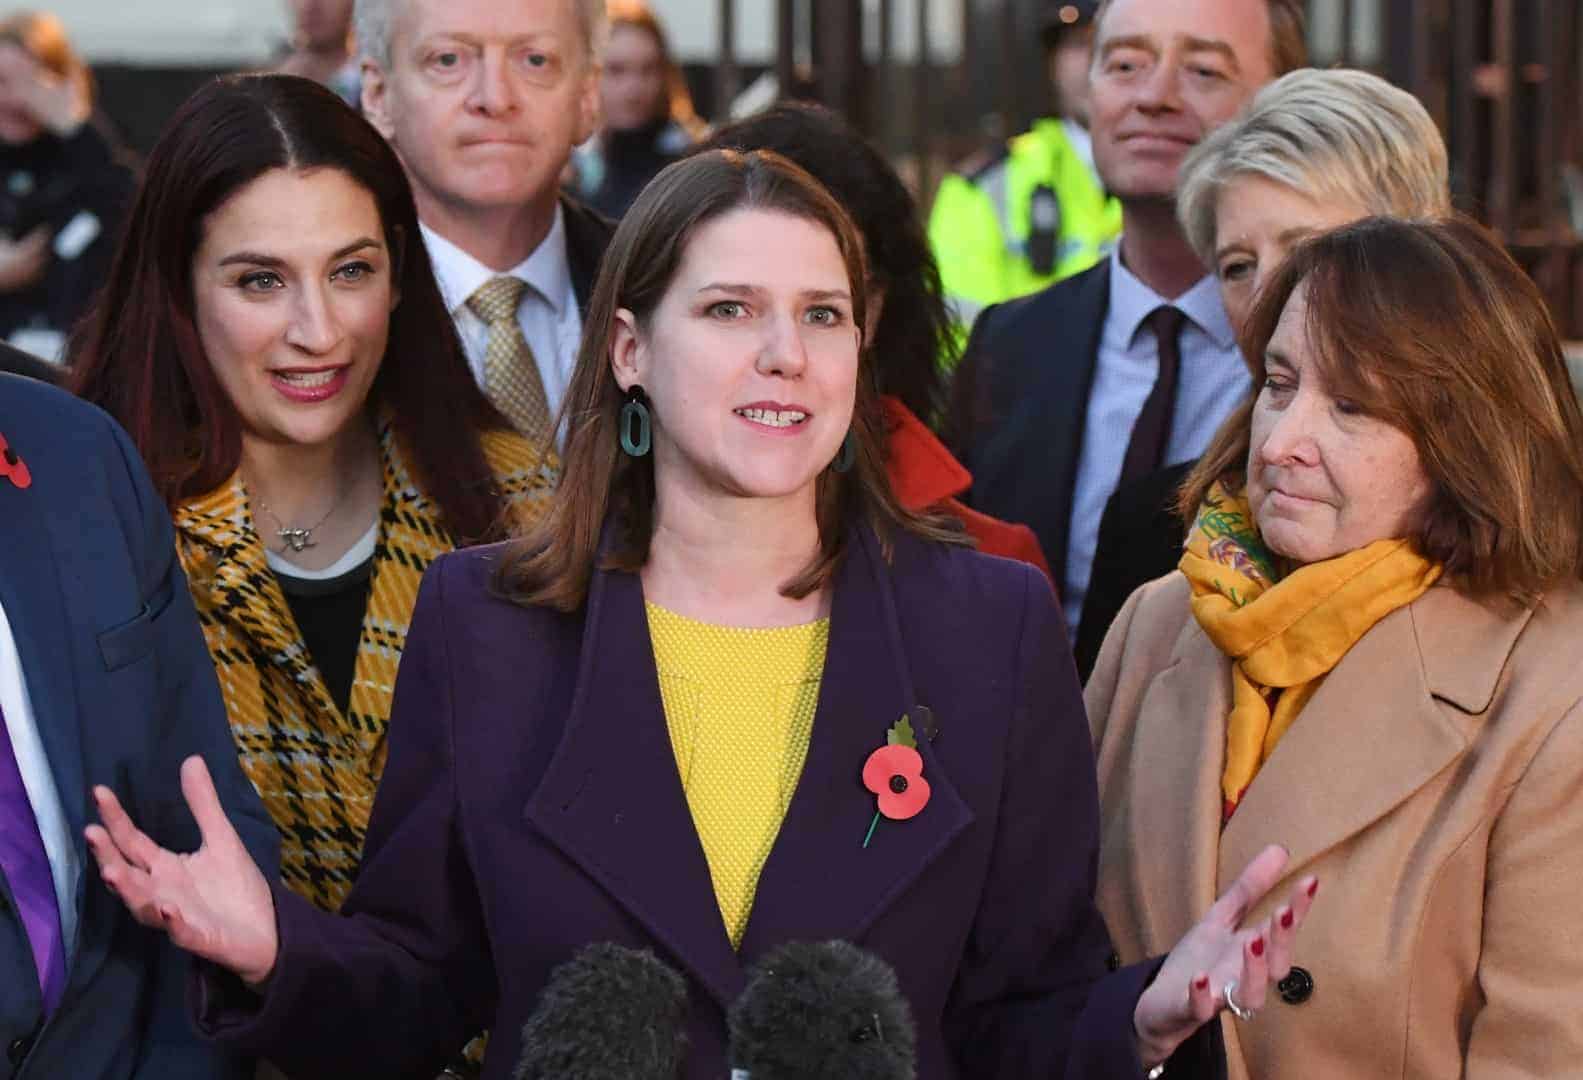 Jo Swinson hints at ‘arrangements’ with other pro-Remain parties